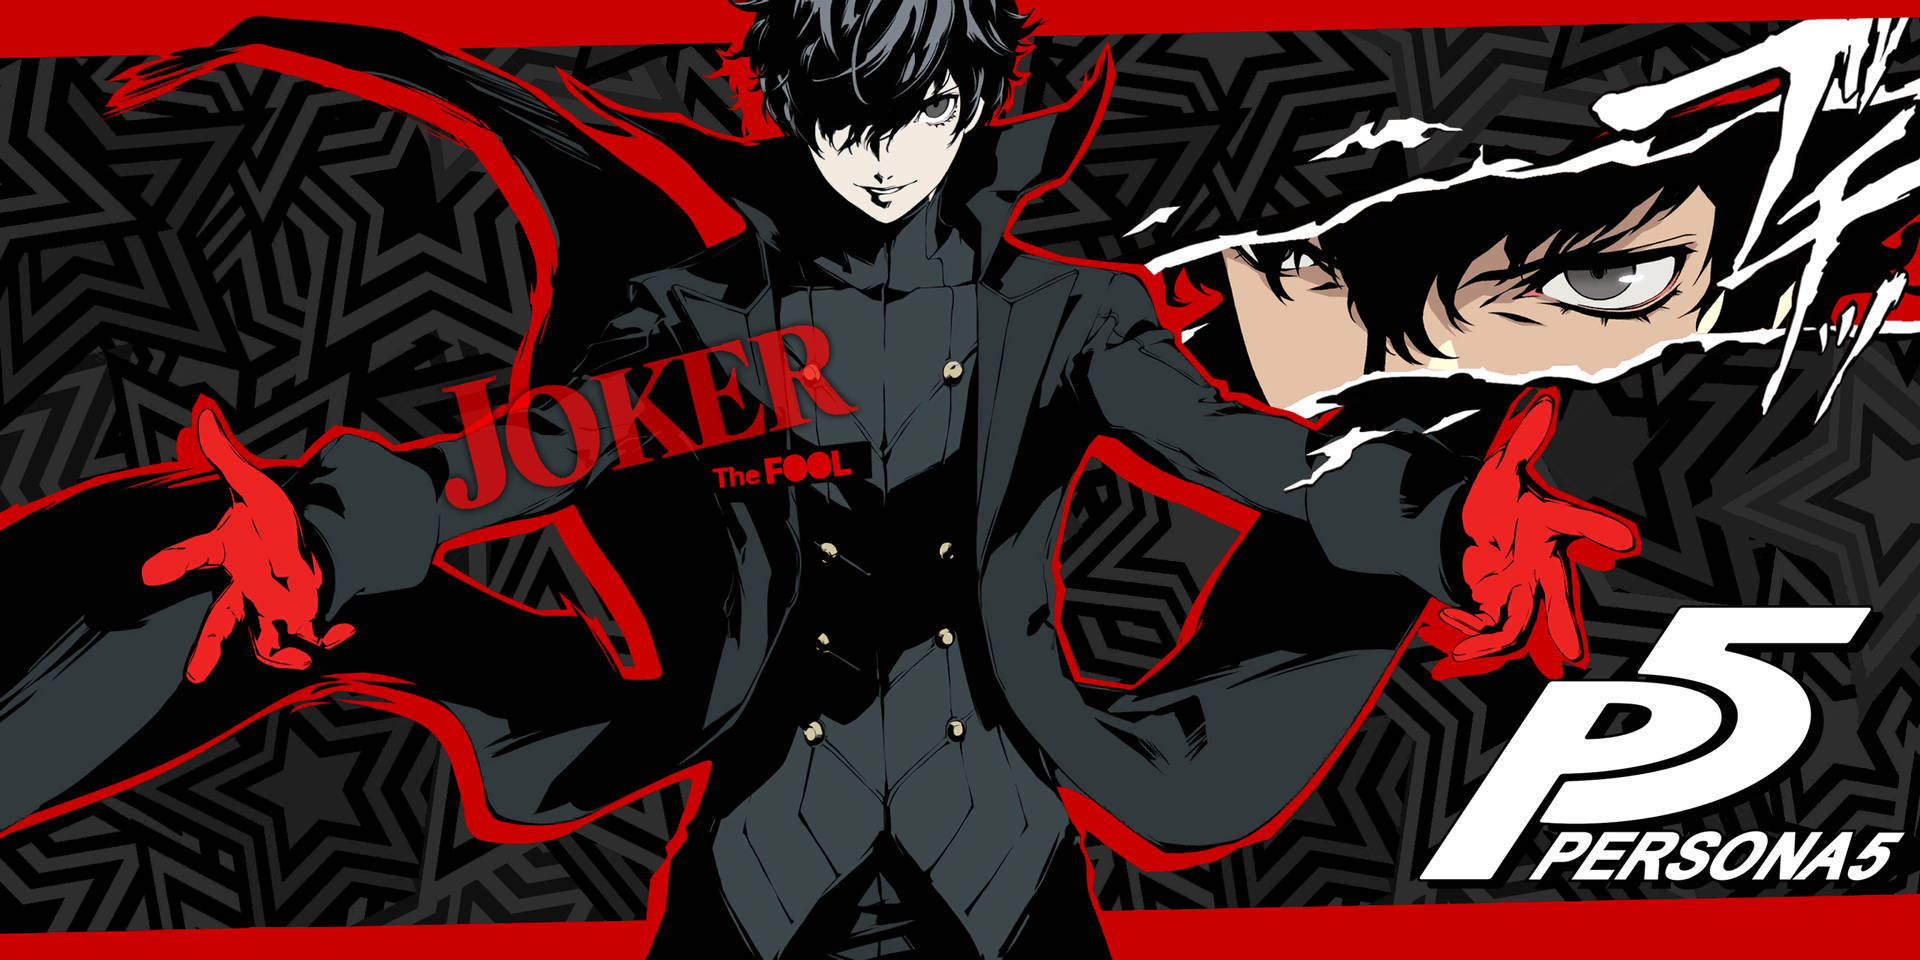 Celebrating the release of Persona 5 with a background dedicated to the enigmatic Joker. Wallpaper